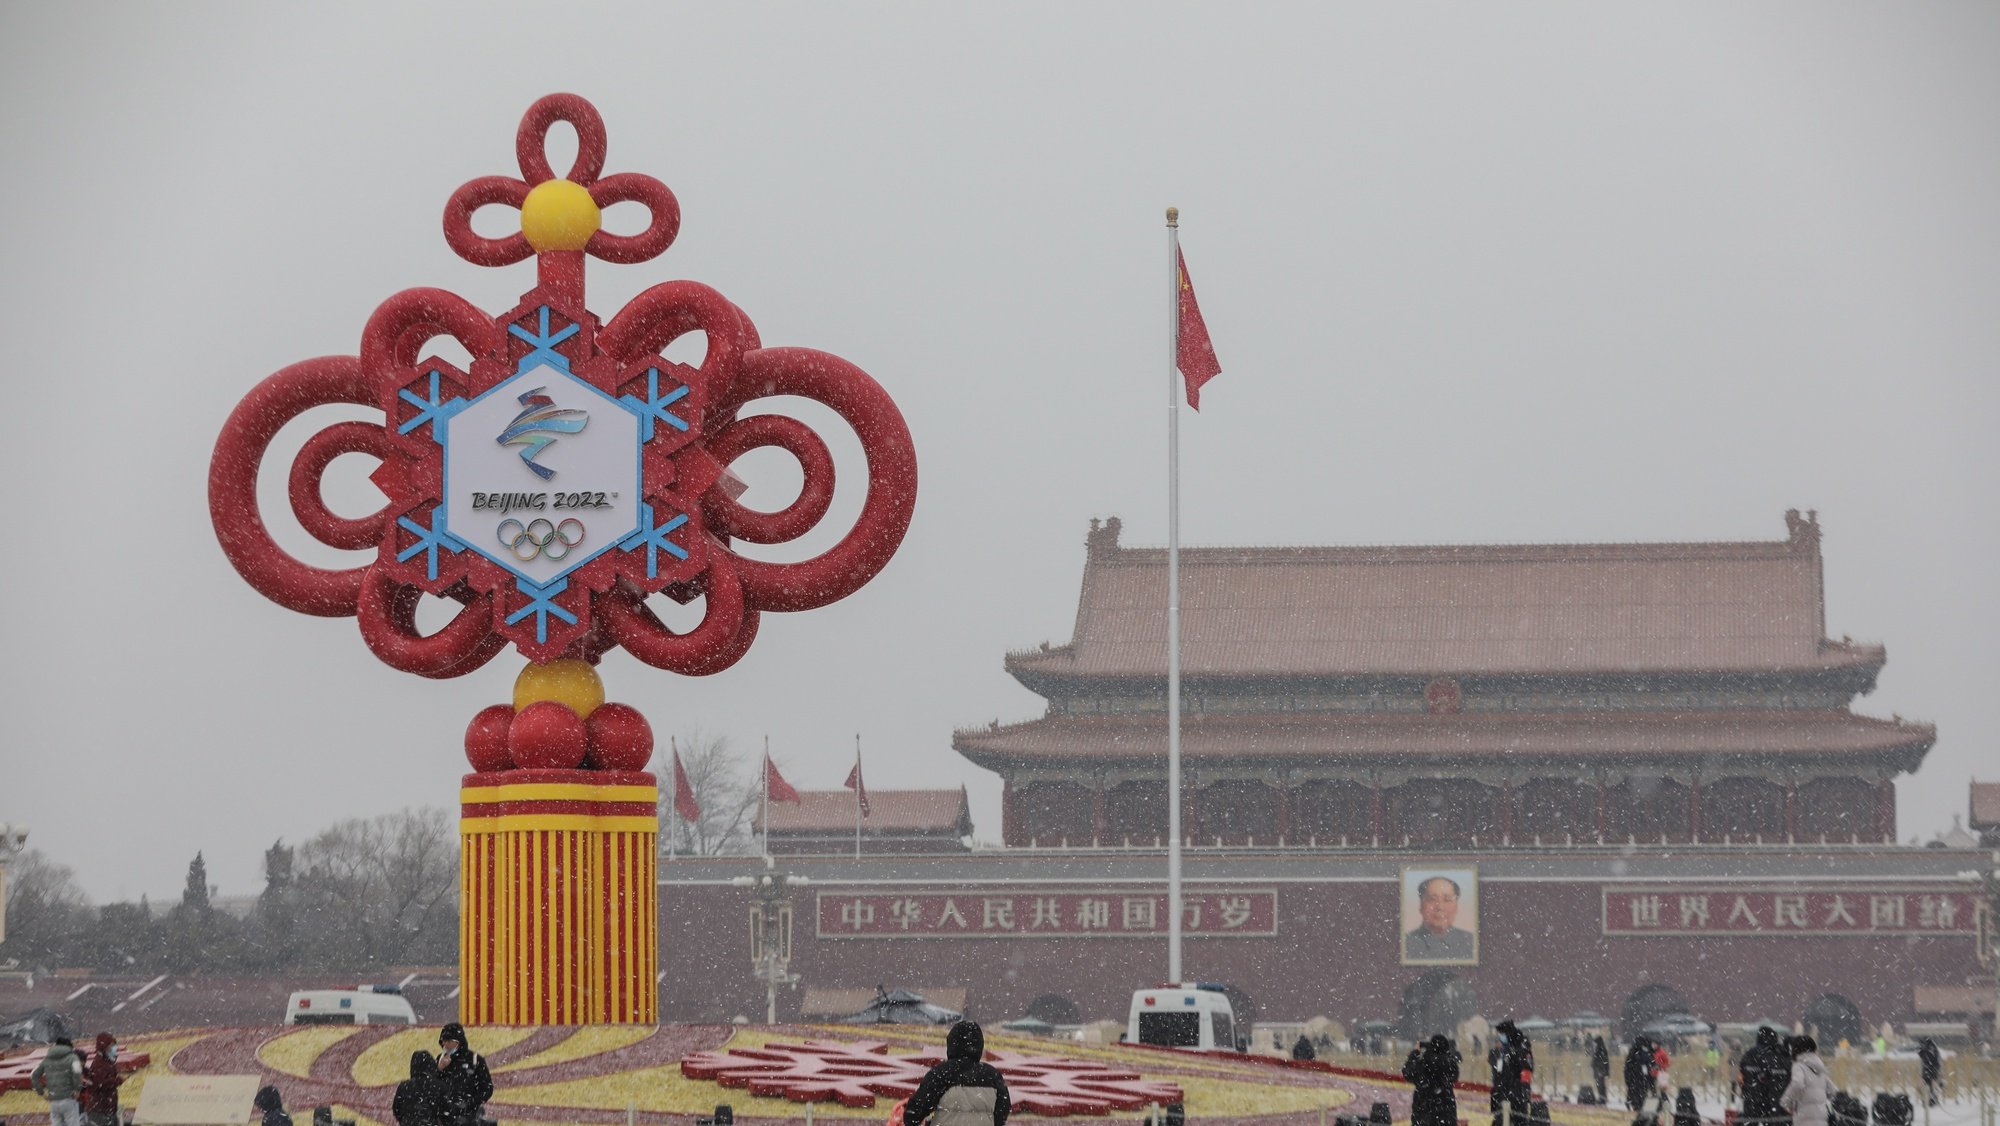 epa09699341 A view shows a decoration for the Beijing Winter Olympics Games in Tiananmen Square in Beijing, China, 21 January 2022. China is scheduled to host the Beijing 2022 Olympic and Paralympic Winter Games in February, making its capital the first city in the world to host both Summer (2008) and Winter Olympics (2022).  EPA/WU HONG